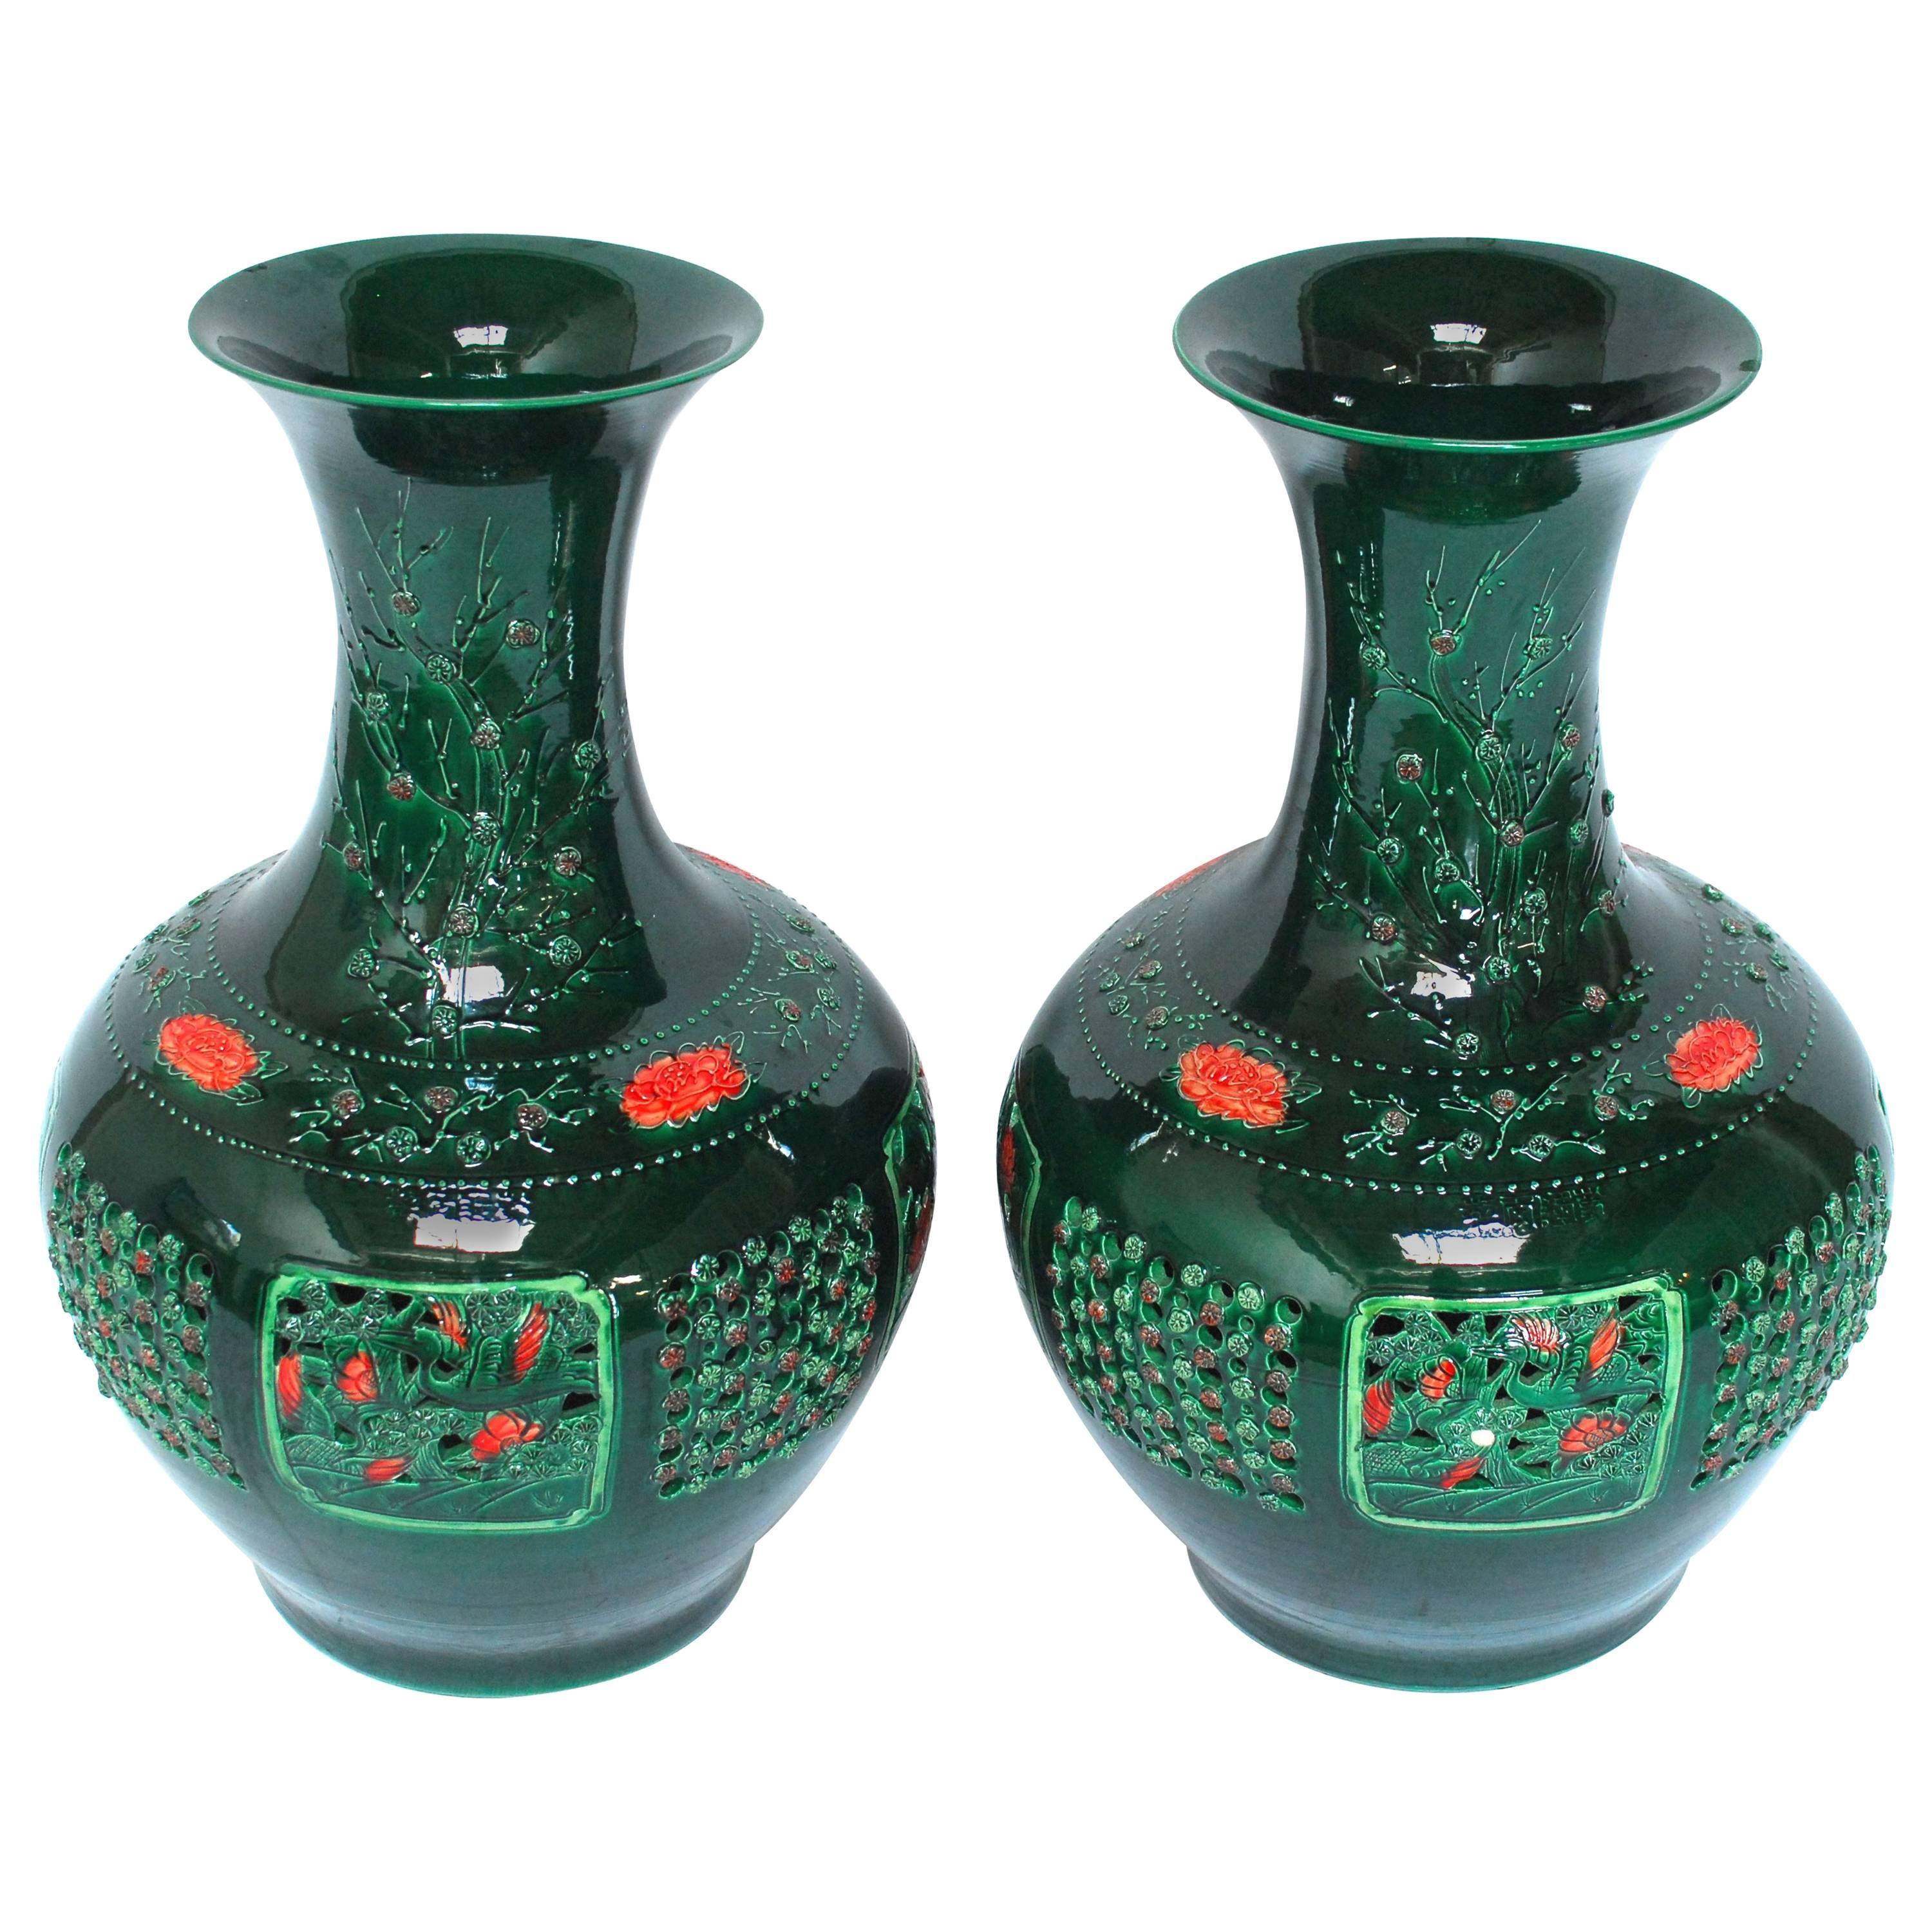 Pair of Large Chinese Jade Green Pierced Baluster Vases